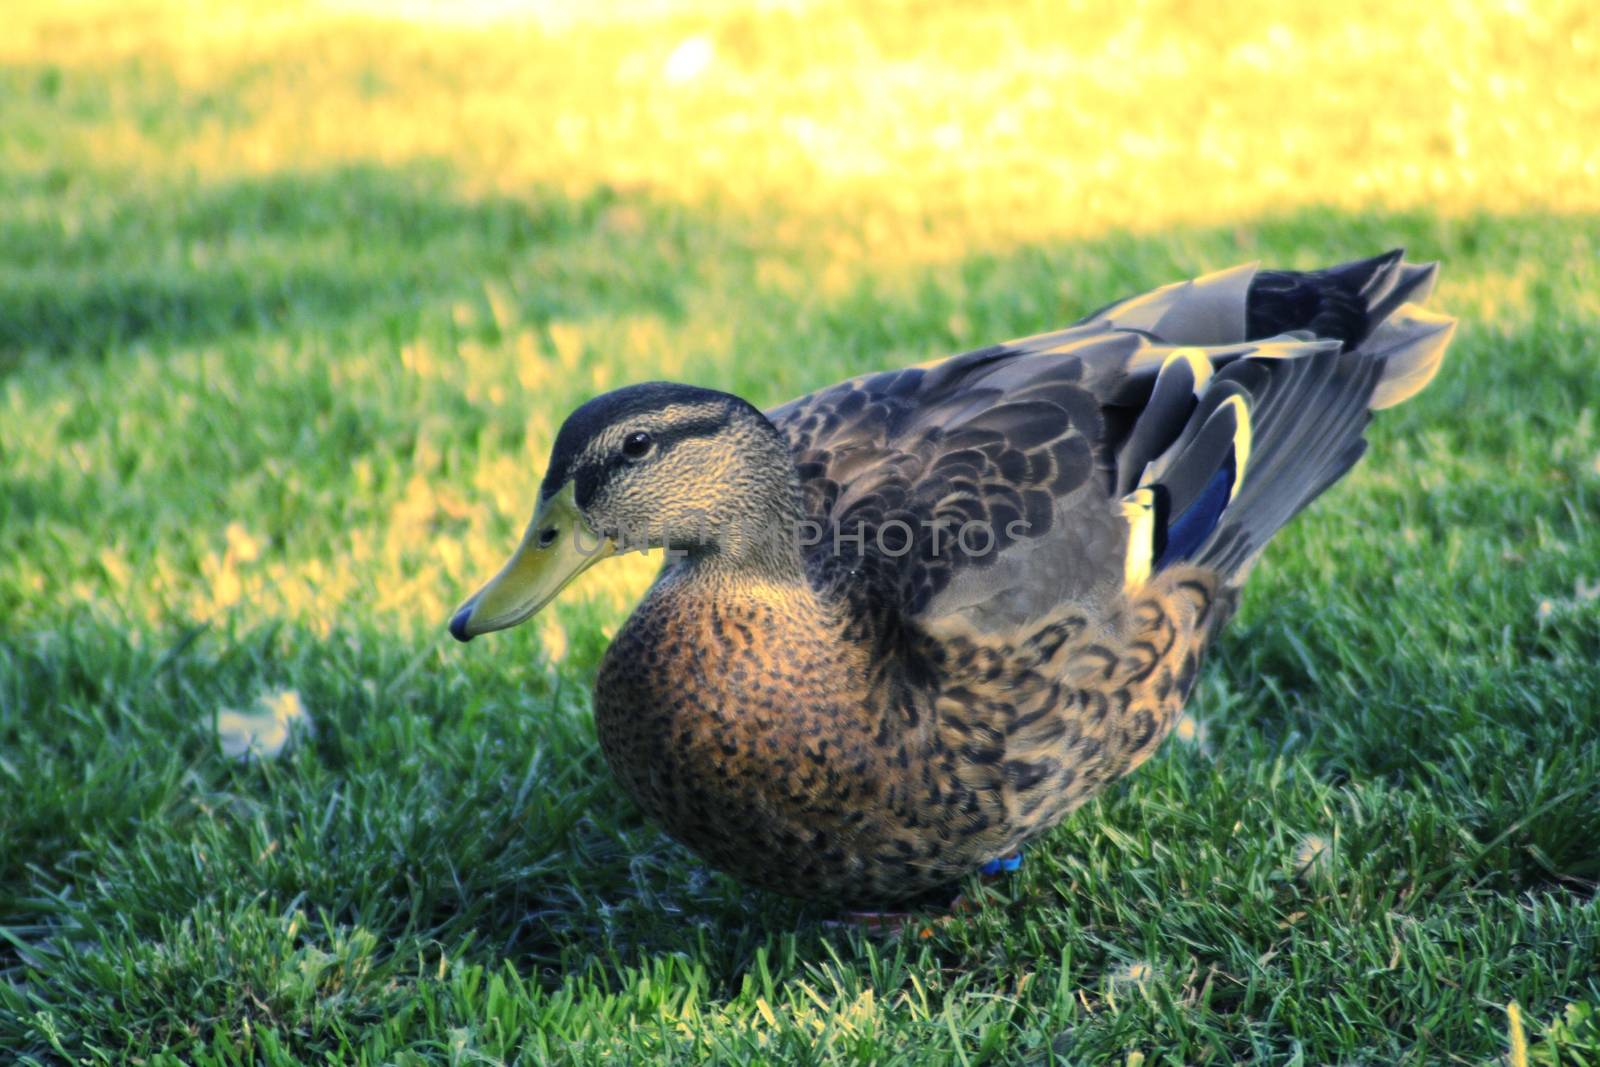 A duck in the grass in Miskolc by balage941